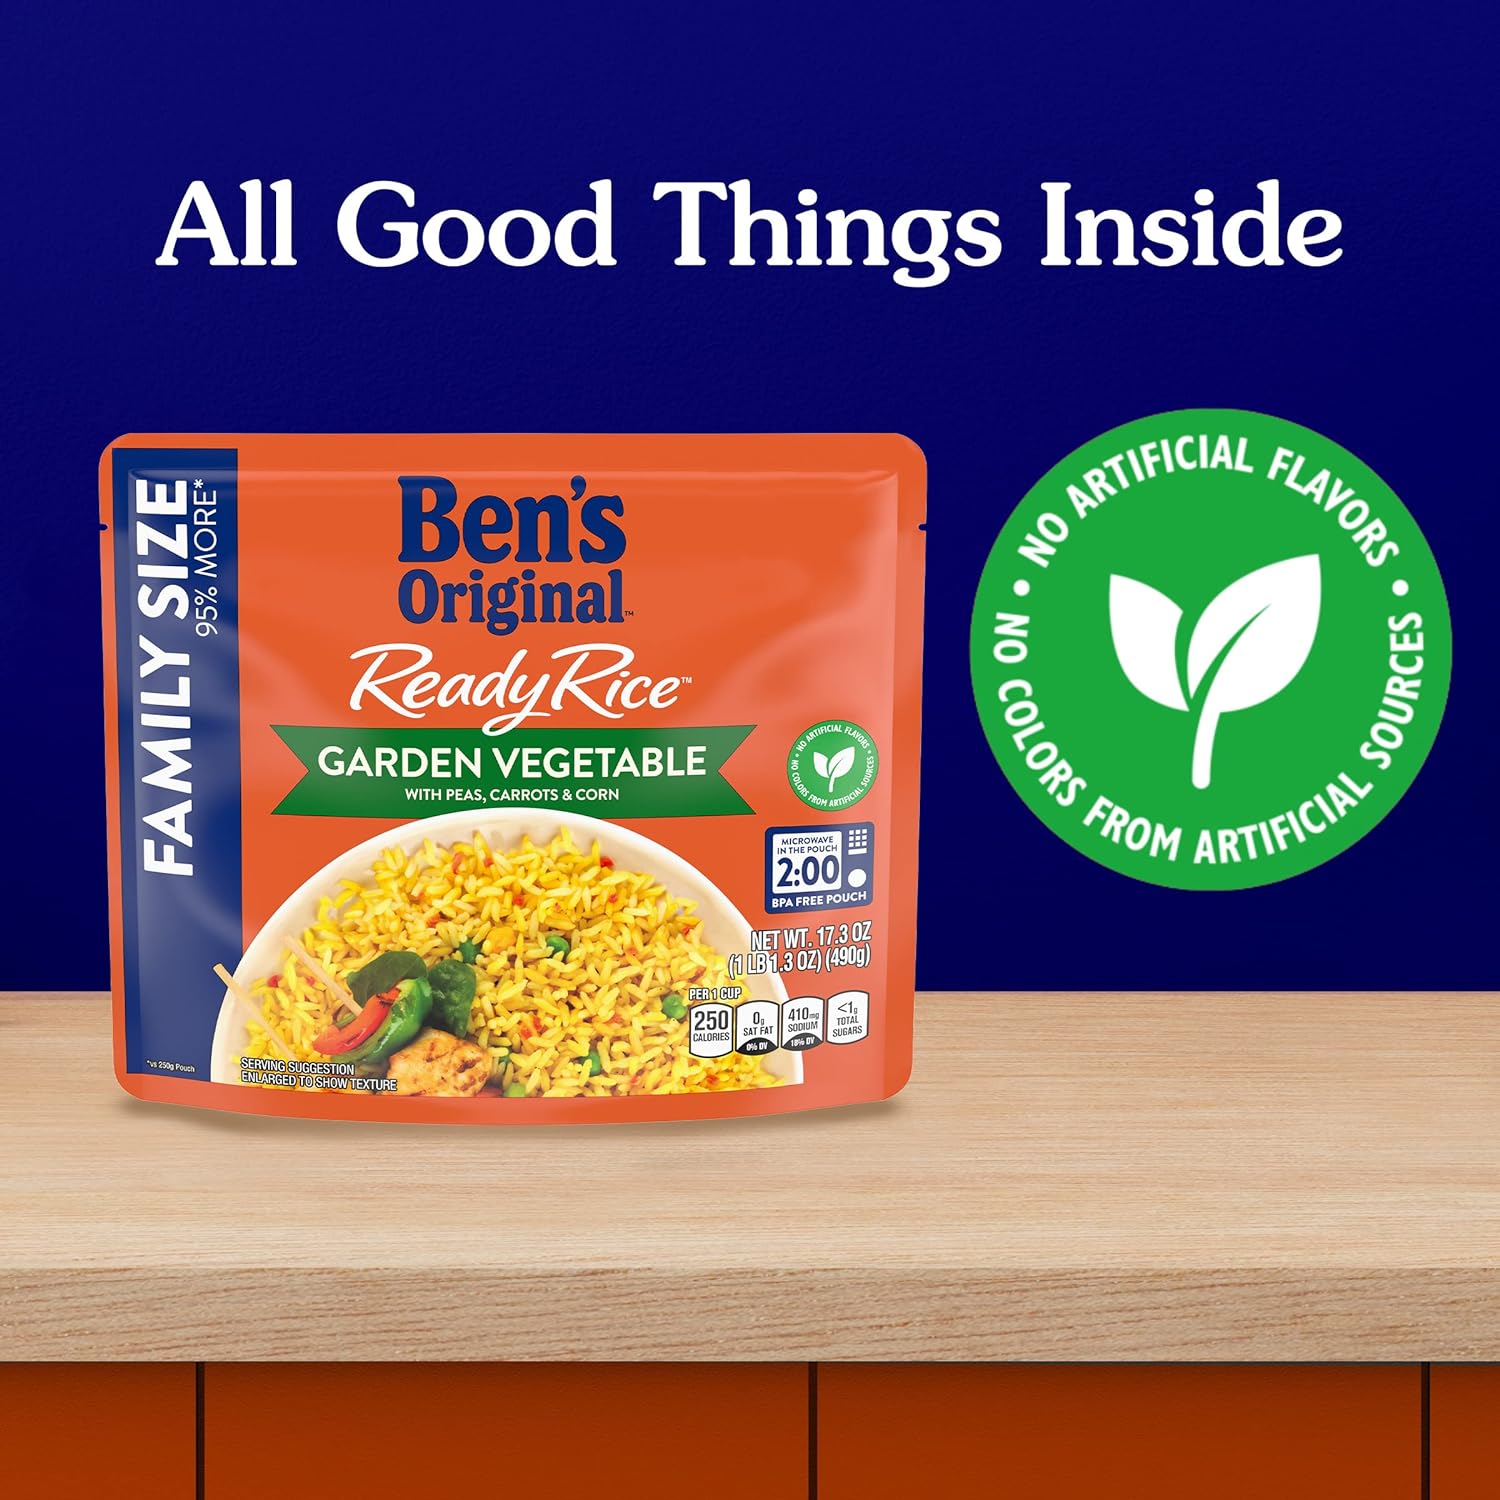 BEN'S ORIGINAL READY RICE Garden Vegetable Medley Flavored Rice, Family Size, 17.3 OZ Pouch (Pack of 6) : Everything Else